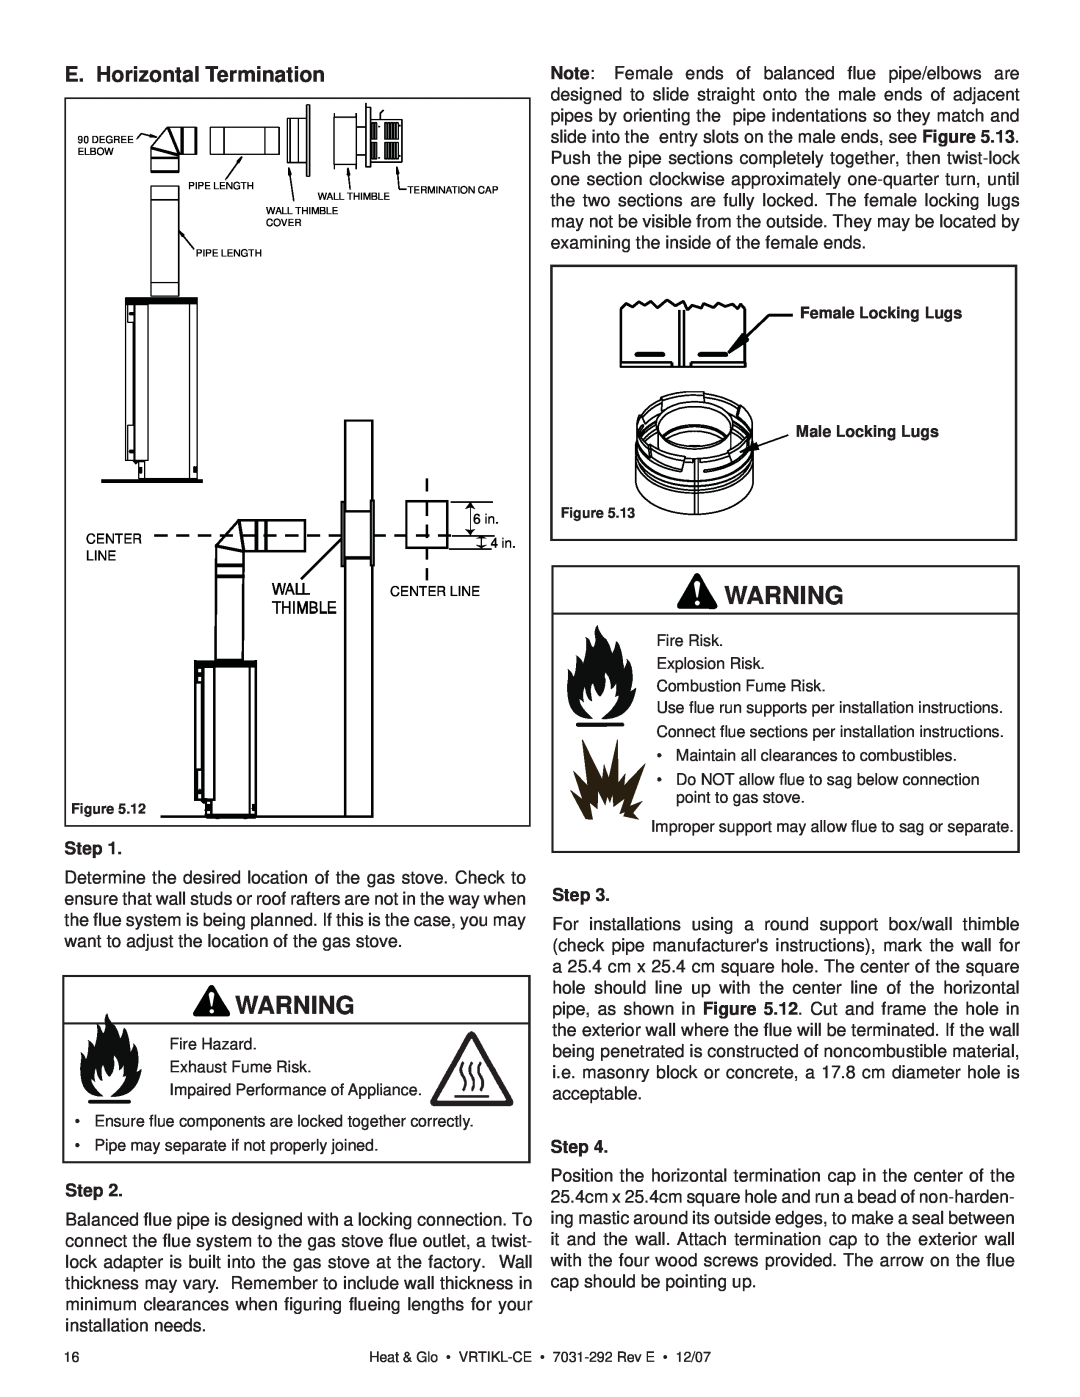 Hearth and Home Technologies VRT-BZ-N-CE, VRTIKL-CE, VRT-GY-P-CE, VRT-GY-N-CE, VRT-BZ-B-CE E. Horizontal Termination, Step 